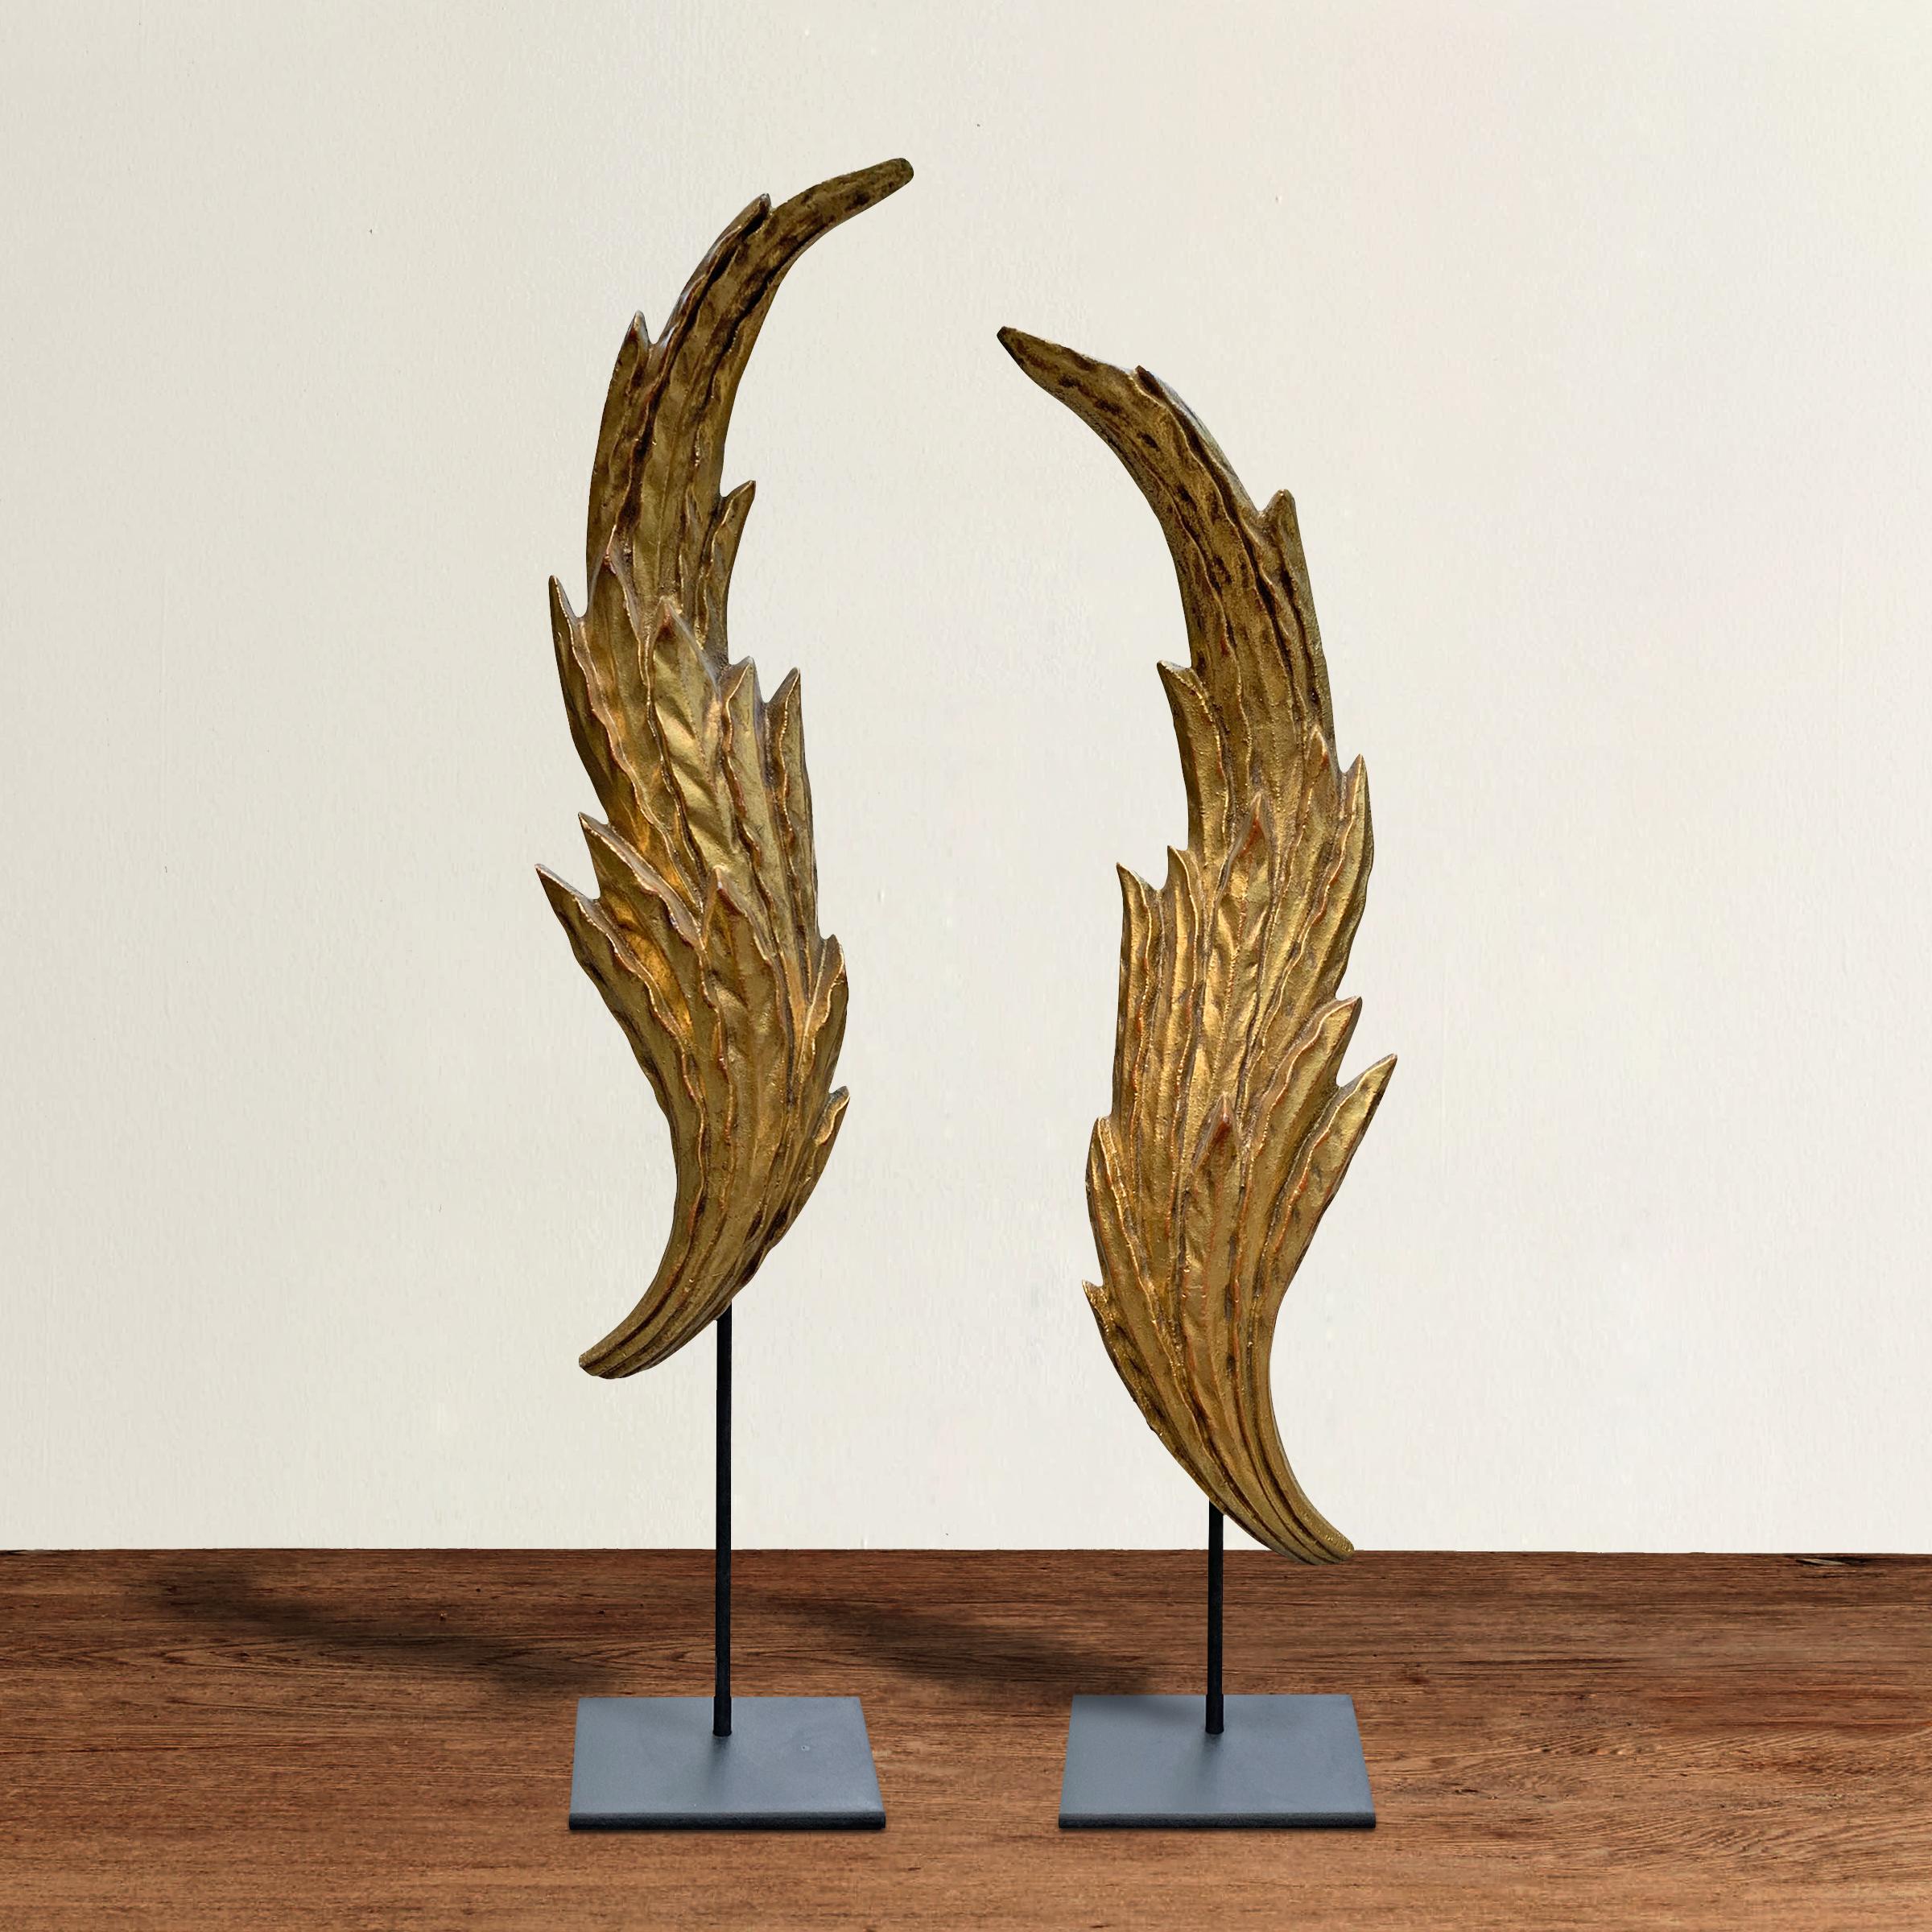 A wonderful pair of mid-20th century American neoclassical style gilt metal laurel leaf architectural fragments, mounted on custom steel stands.